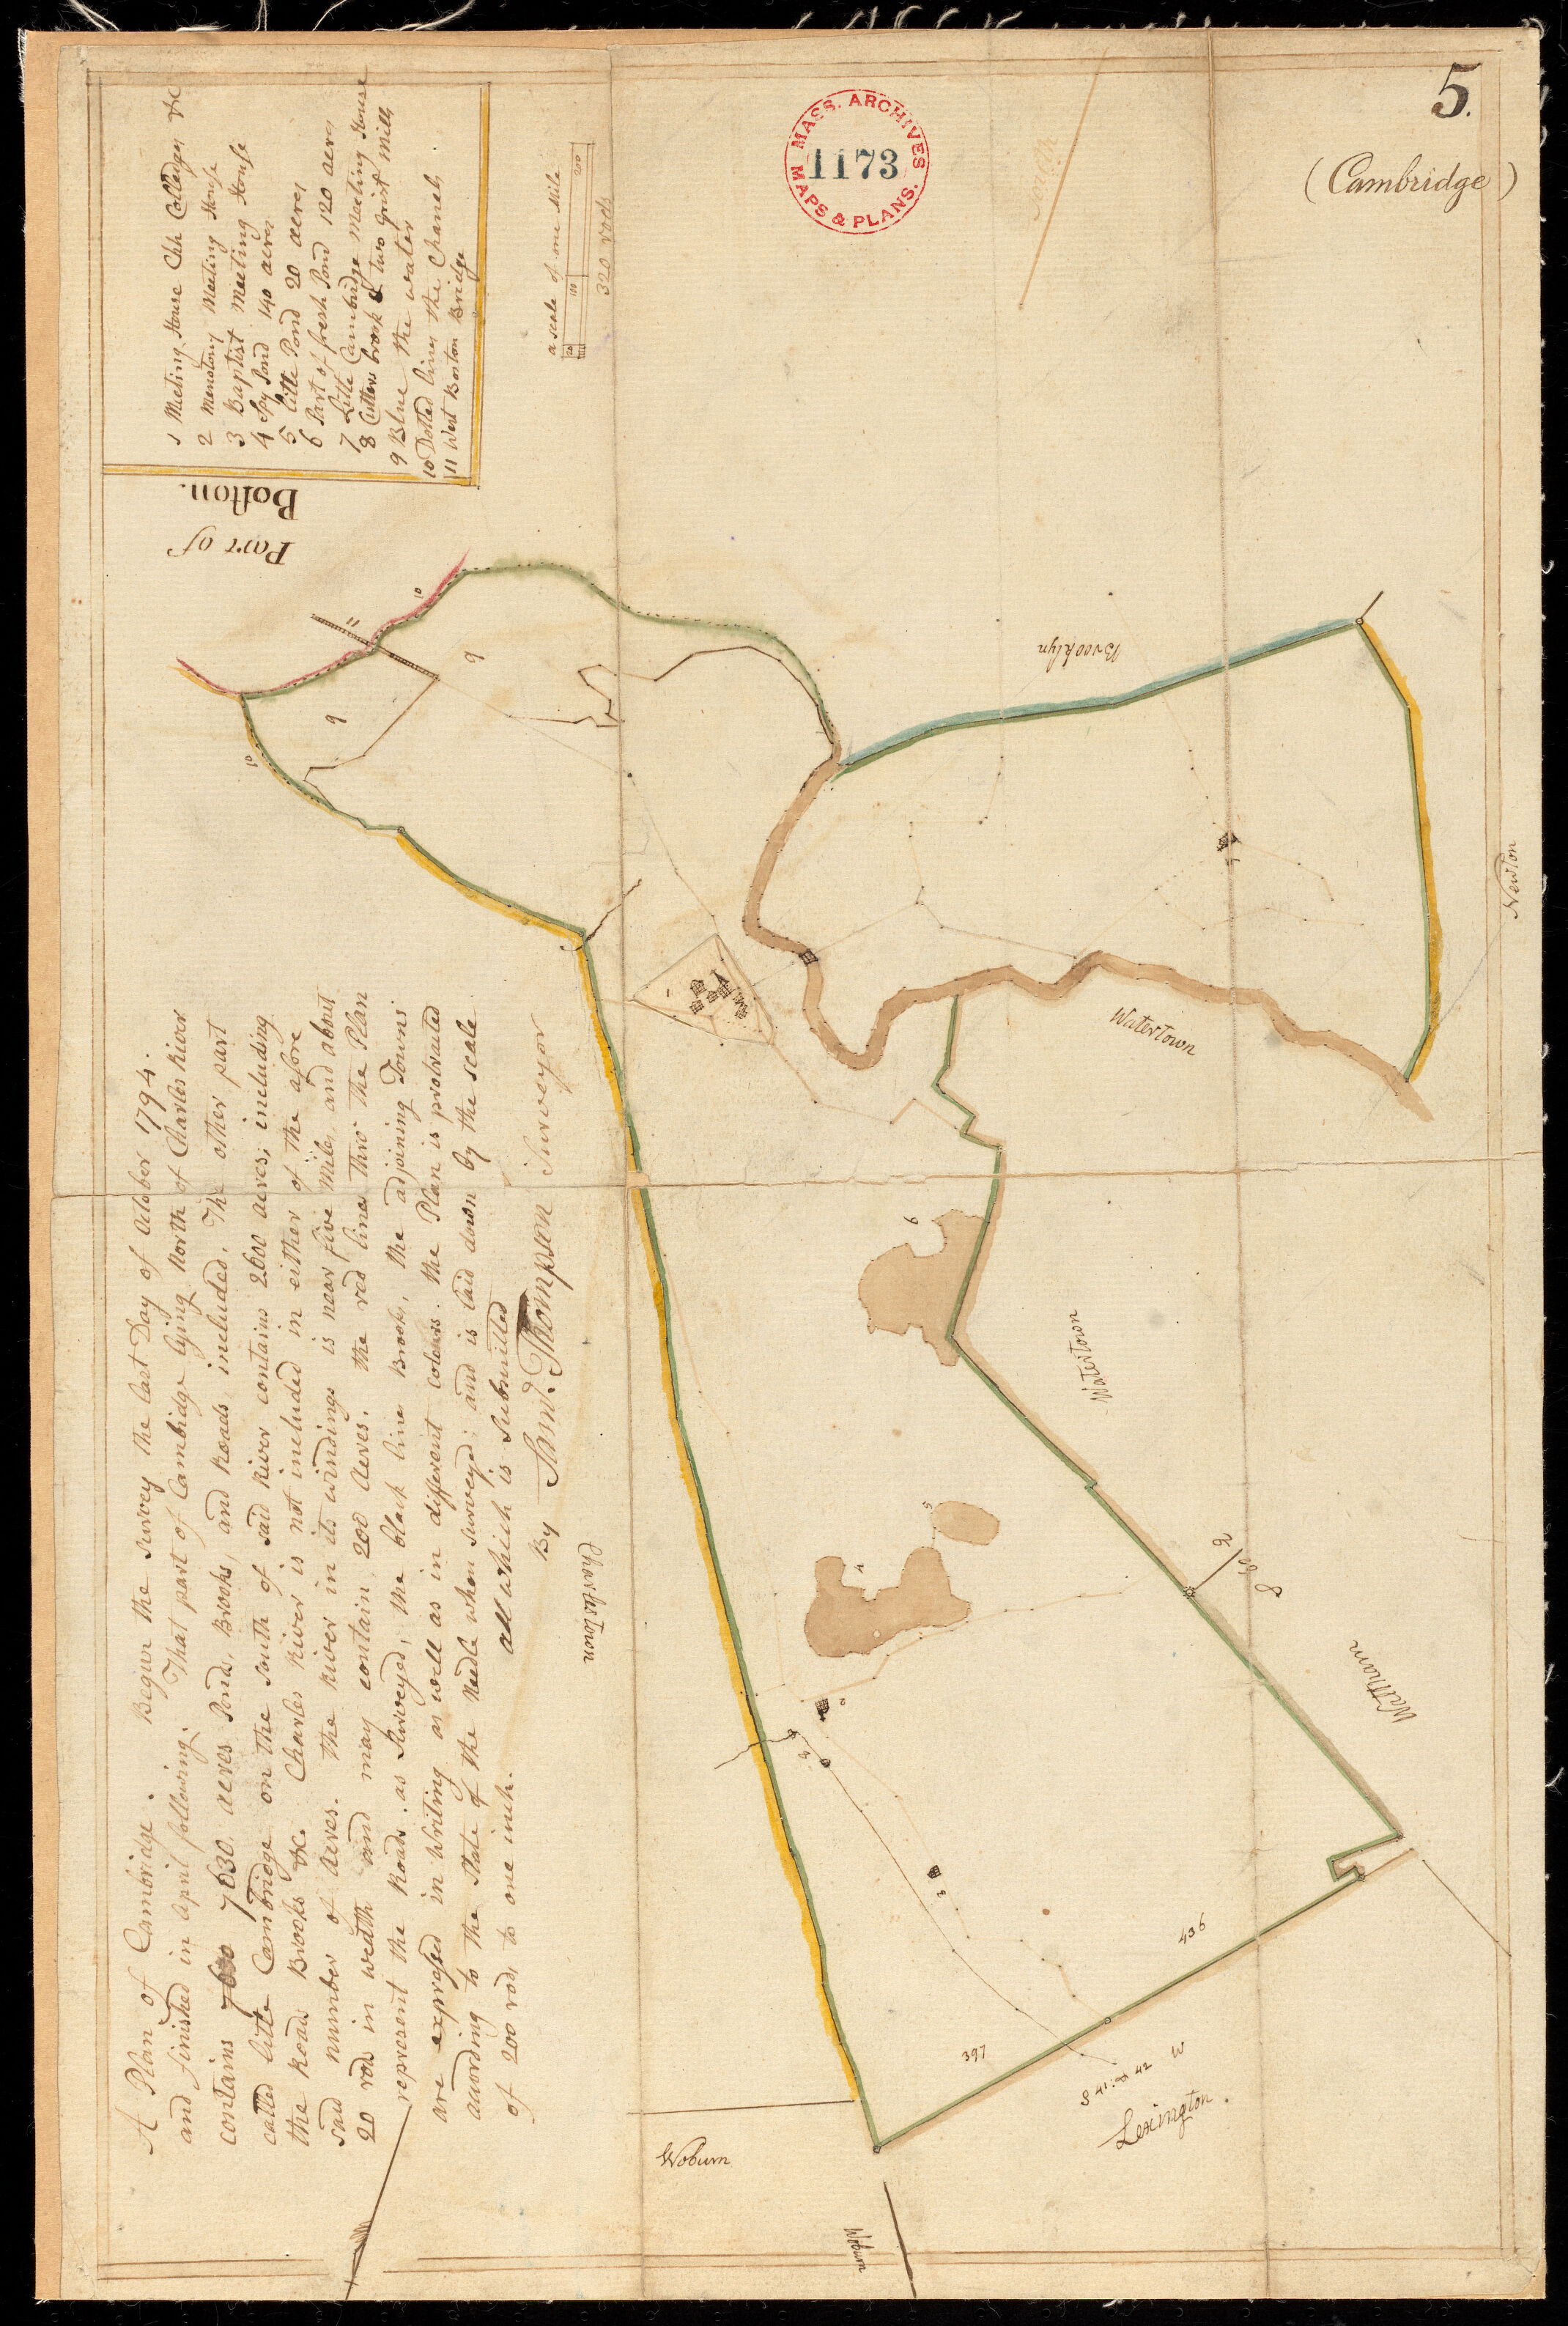 A 1795 plan of Cambridge, from Massachusetts Archives.